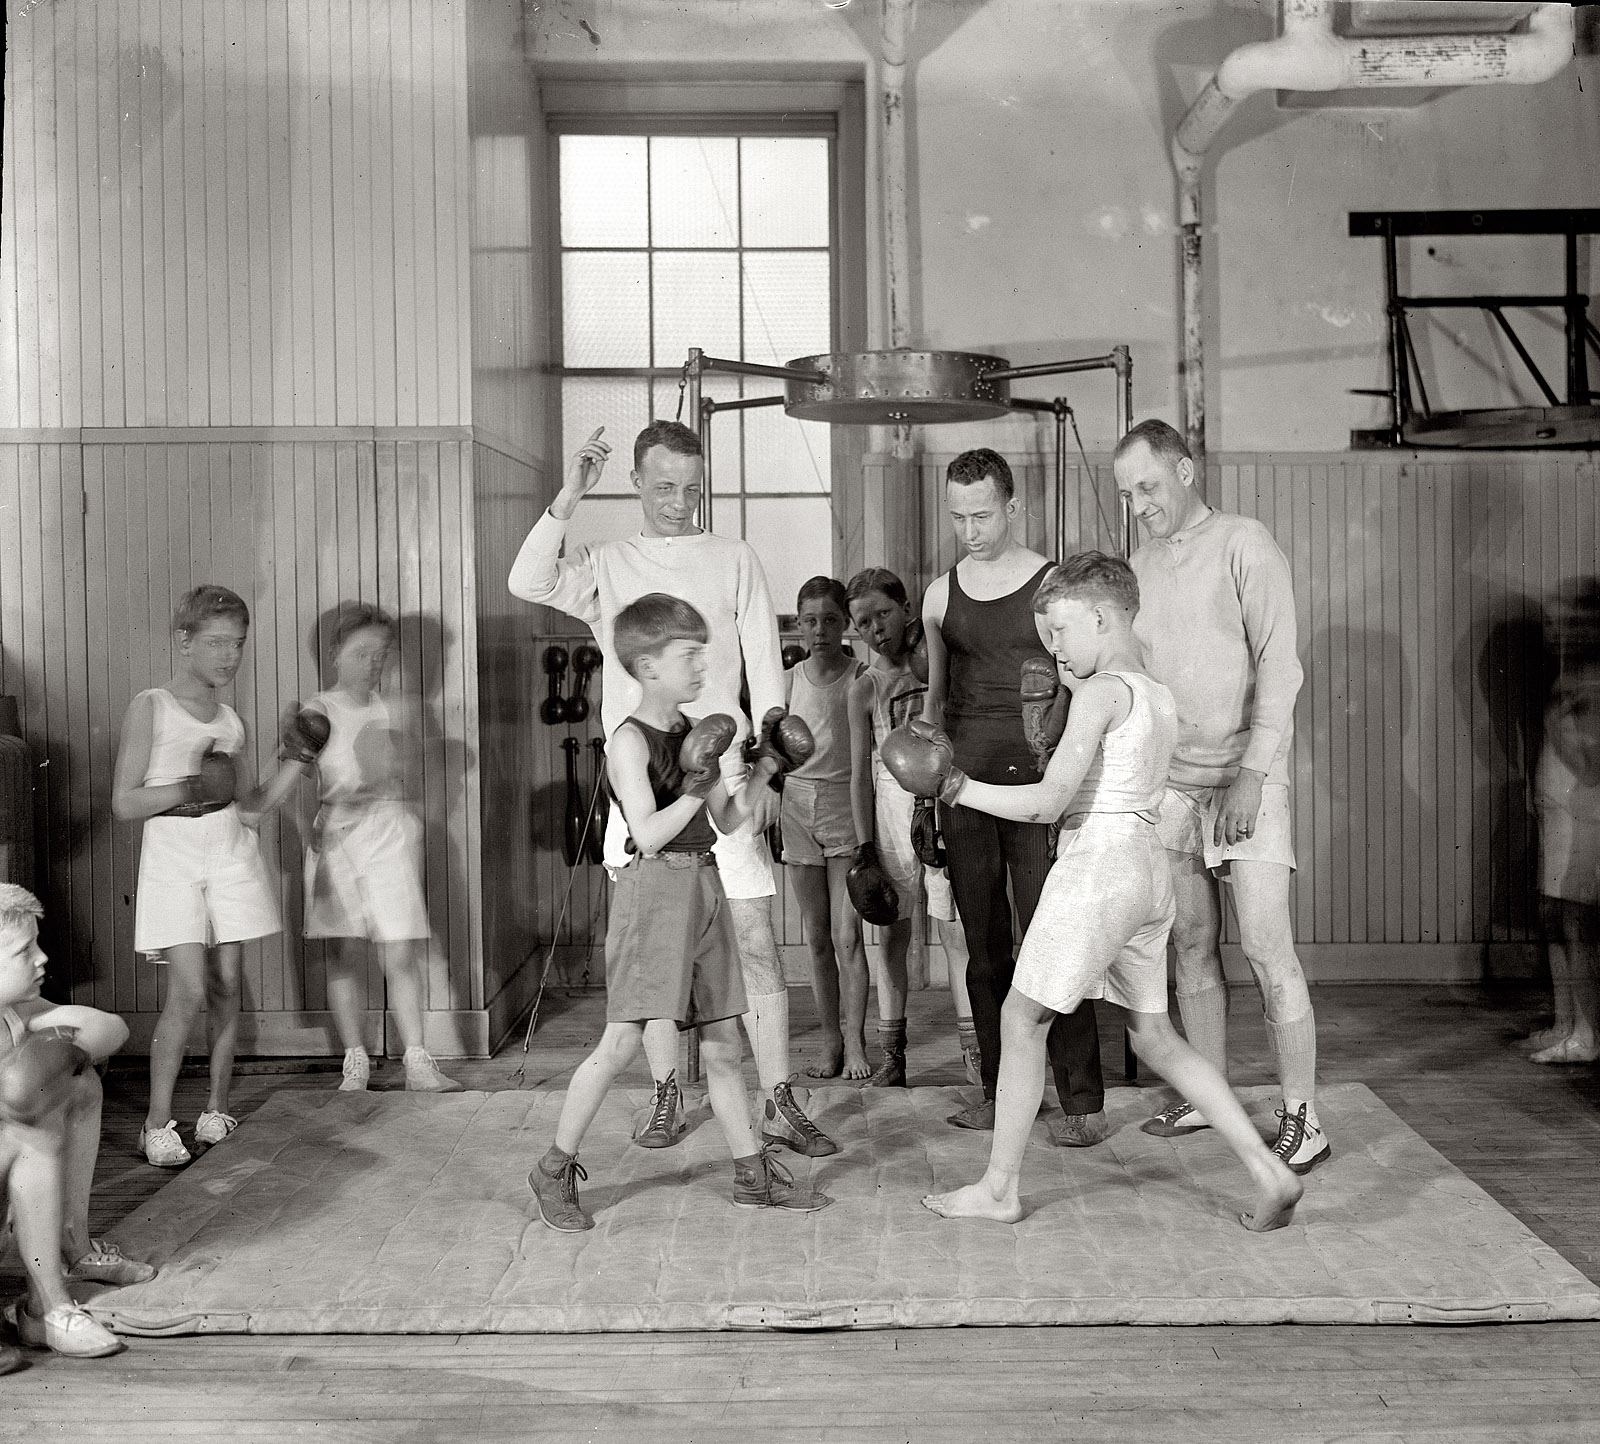 March 22, 1924. Washington, D.C. "Theodore Roosevelt III, boxing." National Photo Company Collection glass negative, Library of Congress. View full size.